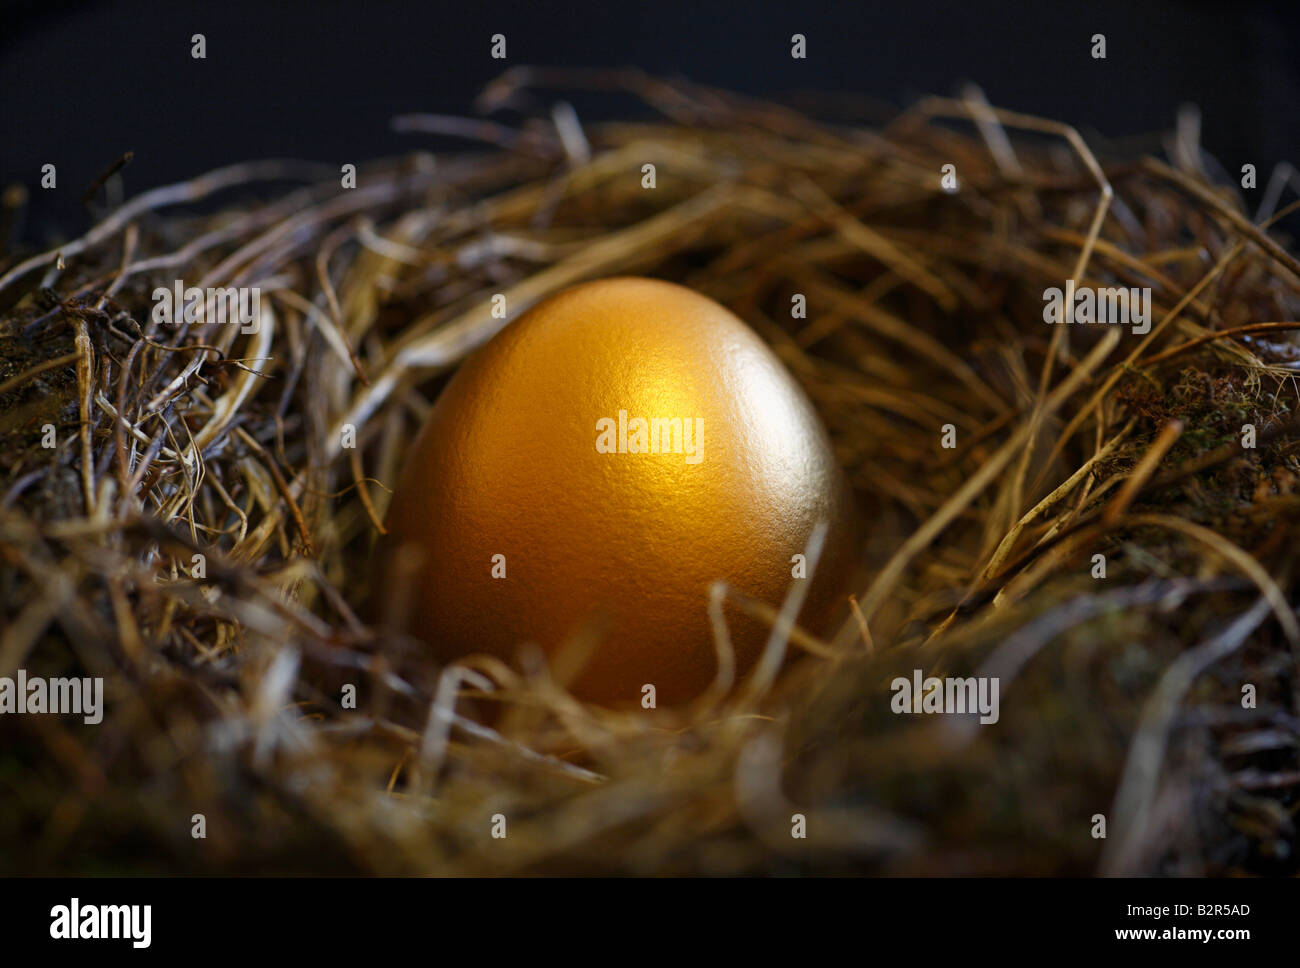 A golden egg in a nest. Stock Photo